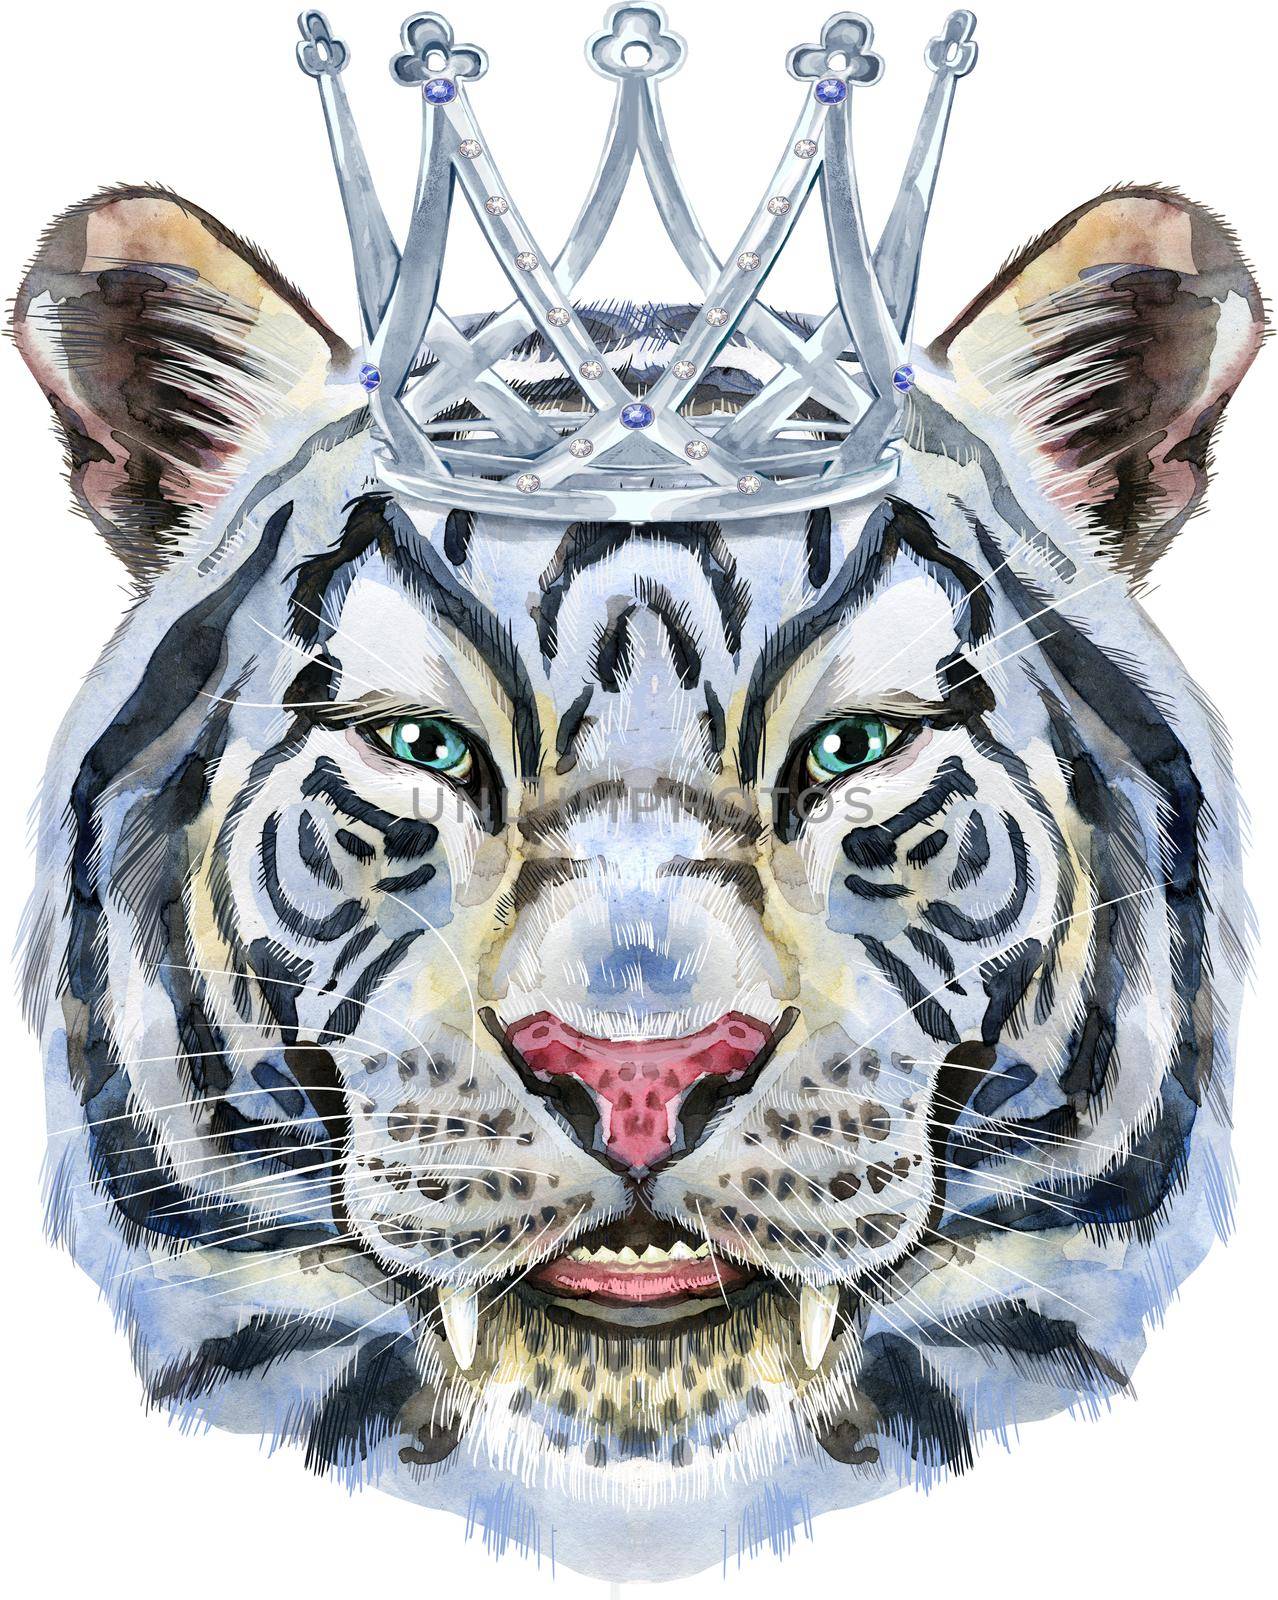 Watercolor illustration of white smiling tiger with silver crown.